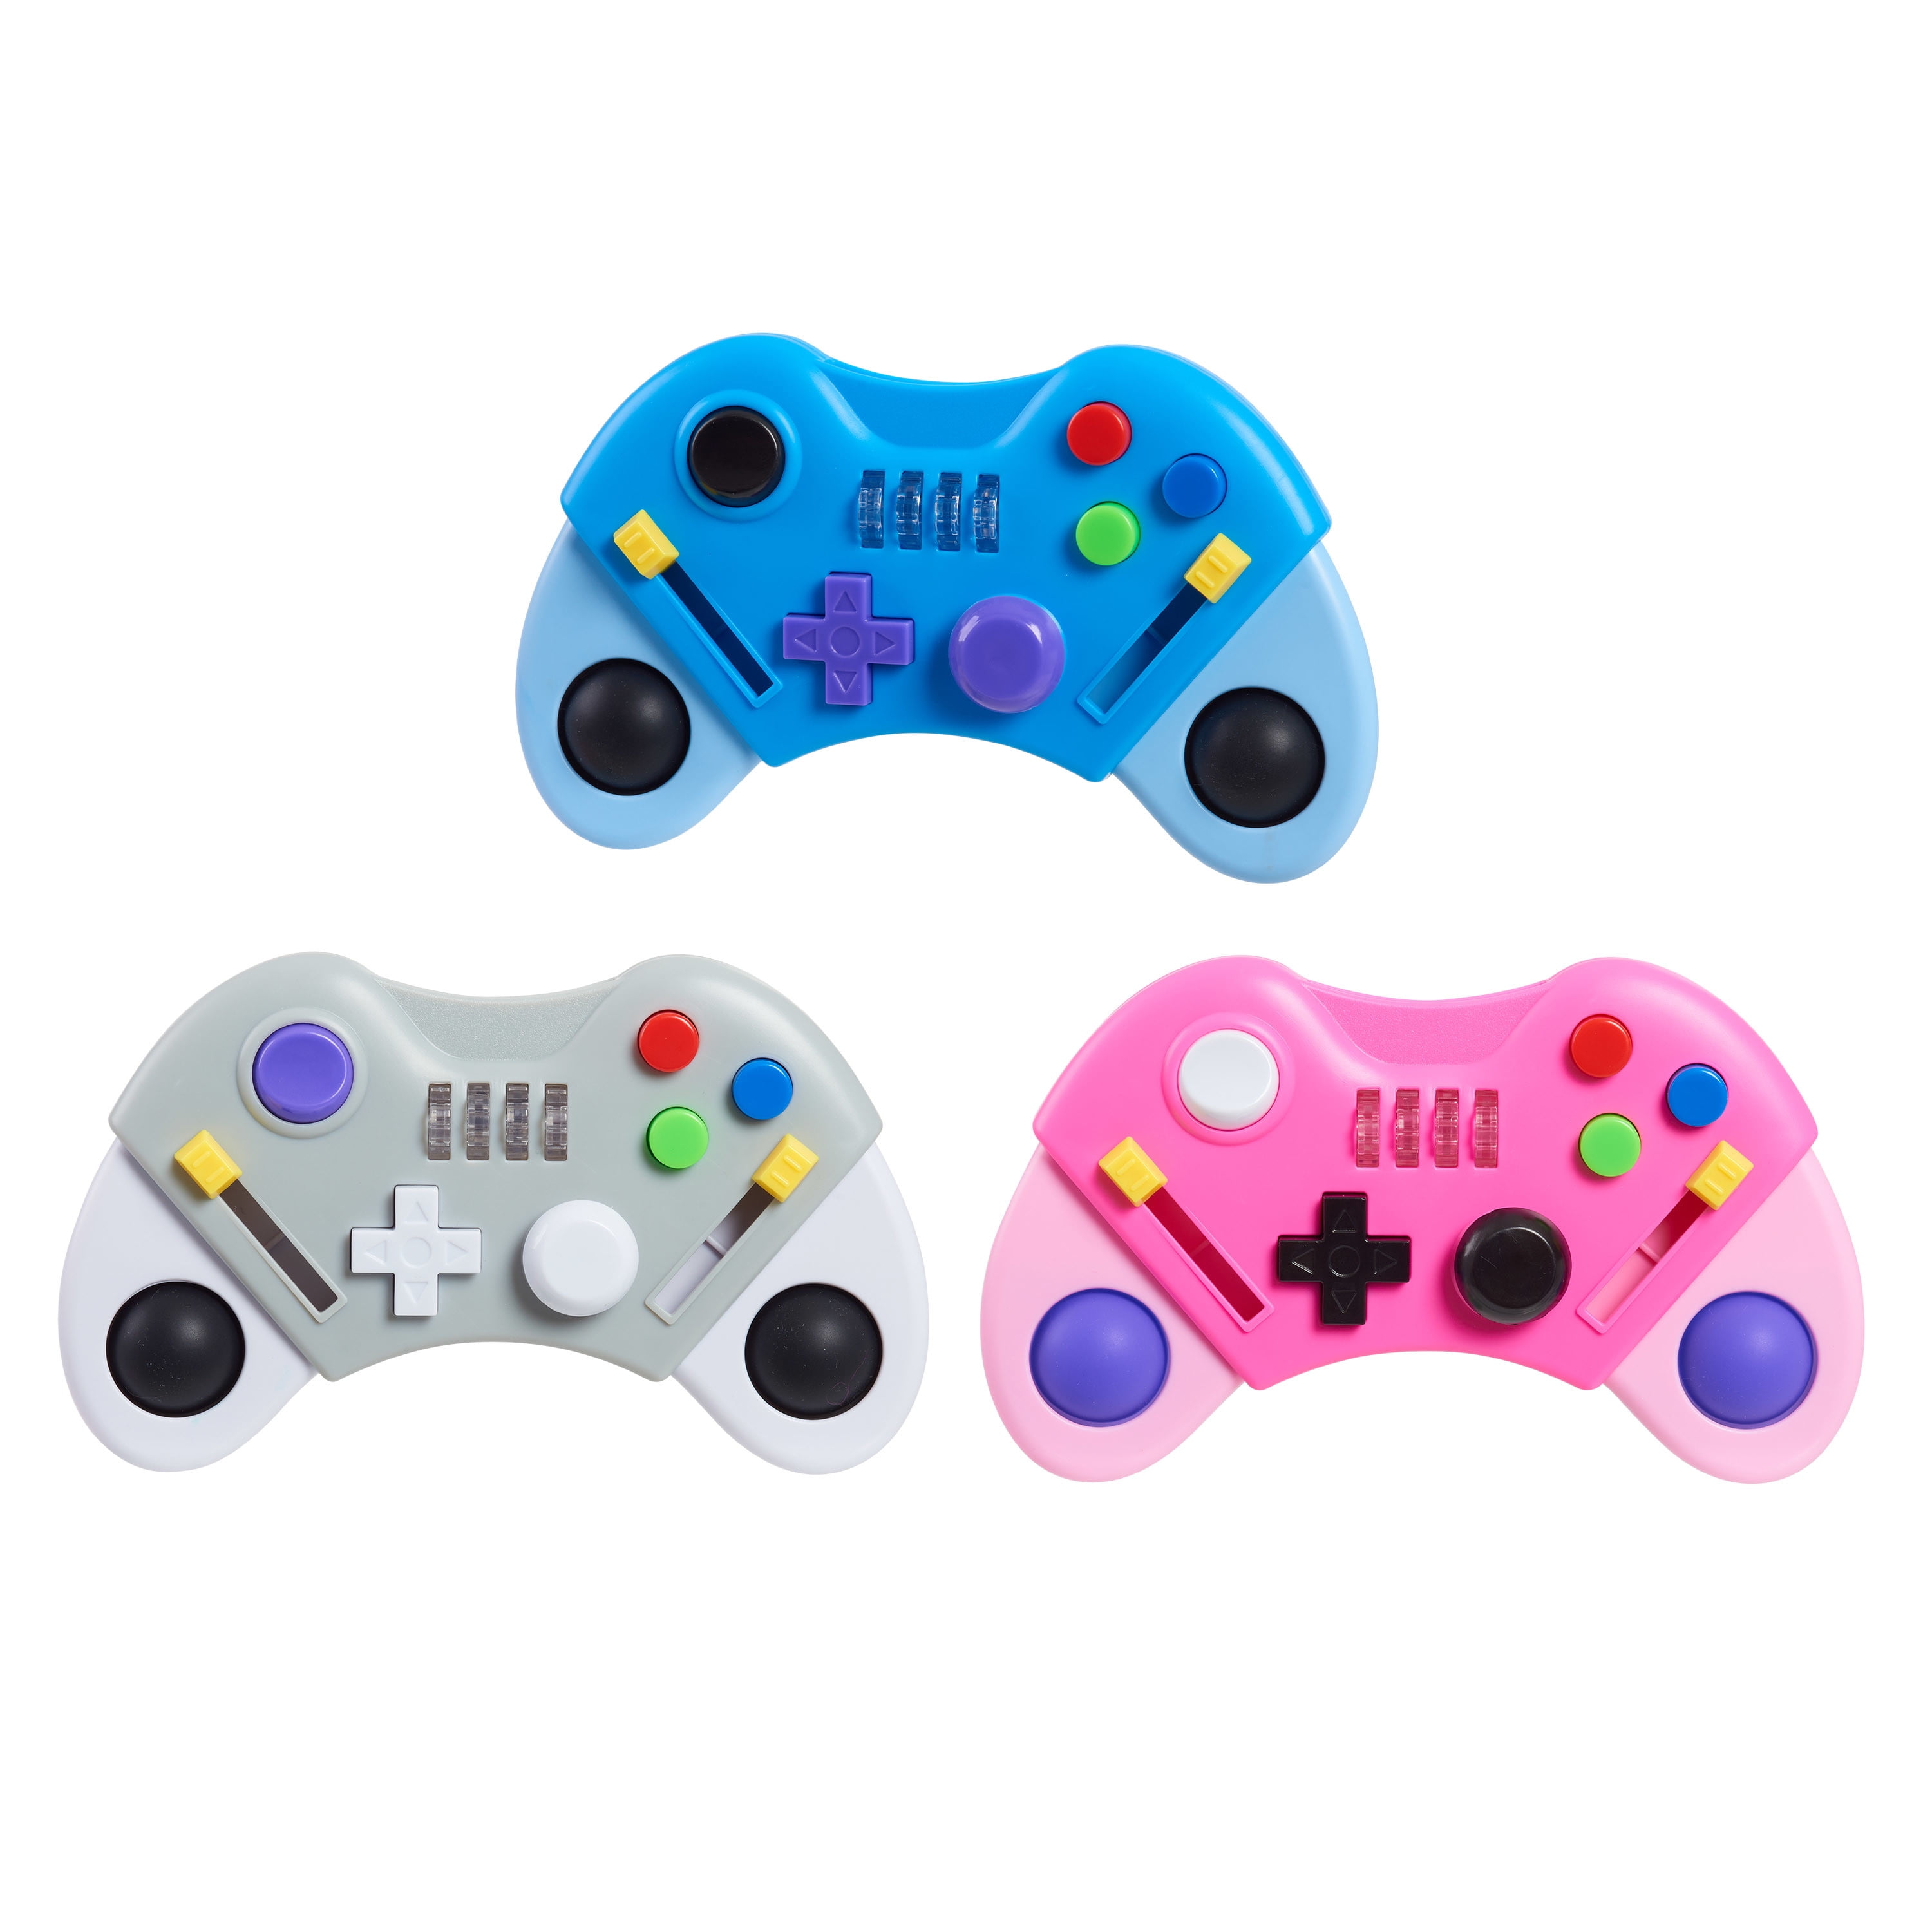 Fidgetz Game Controller Assortment, Styles Vary, Sold Separately, Sensory & Kids Toys for 3 Up, Gifts Presents - Walmart.com